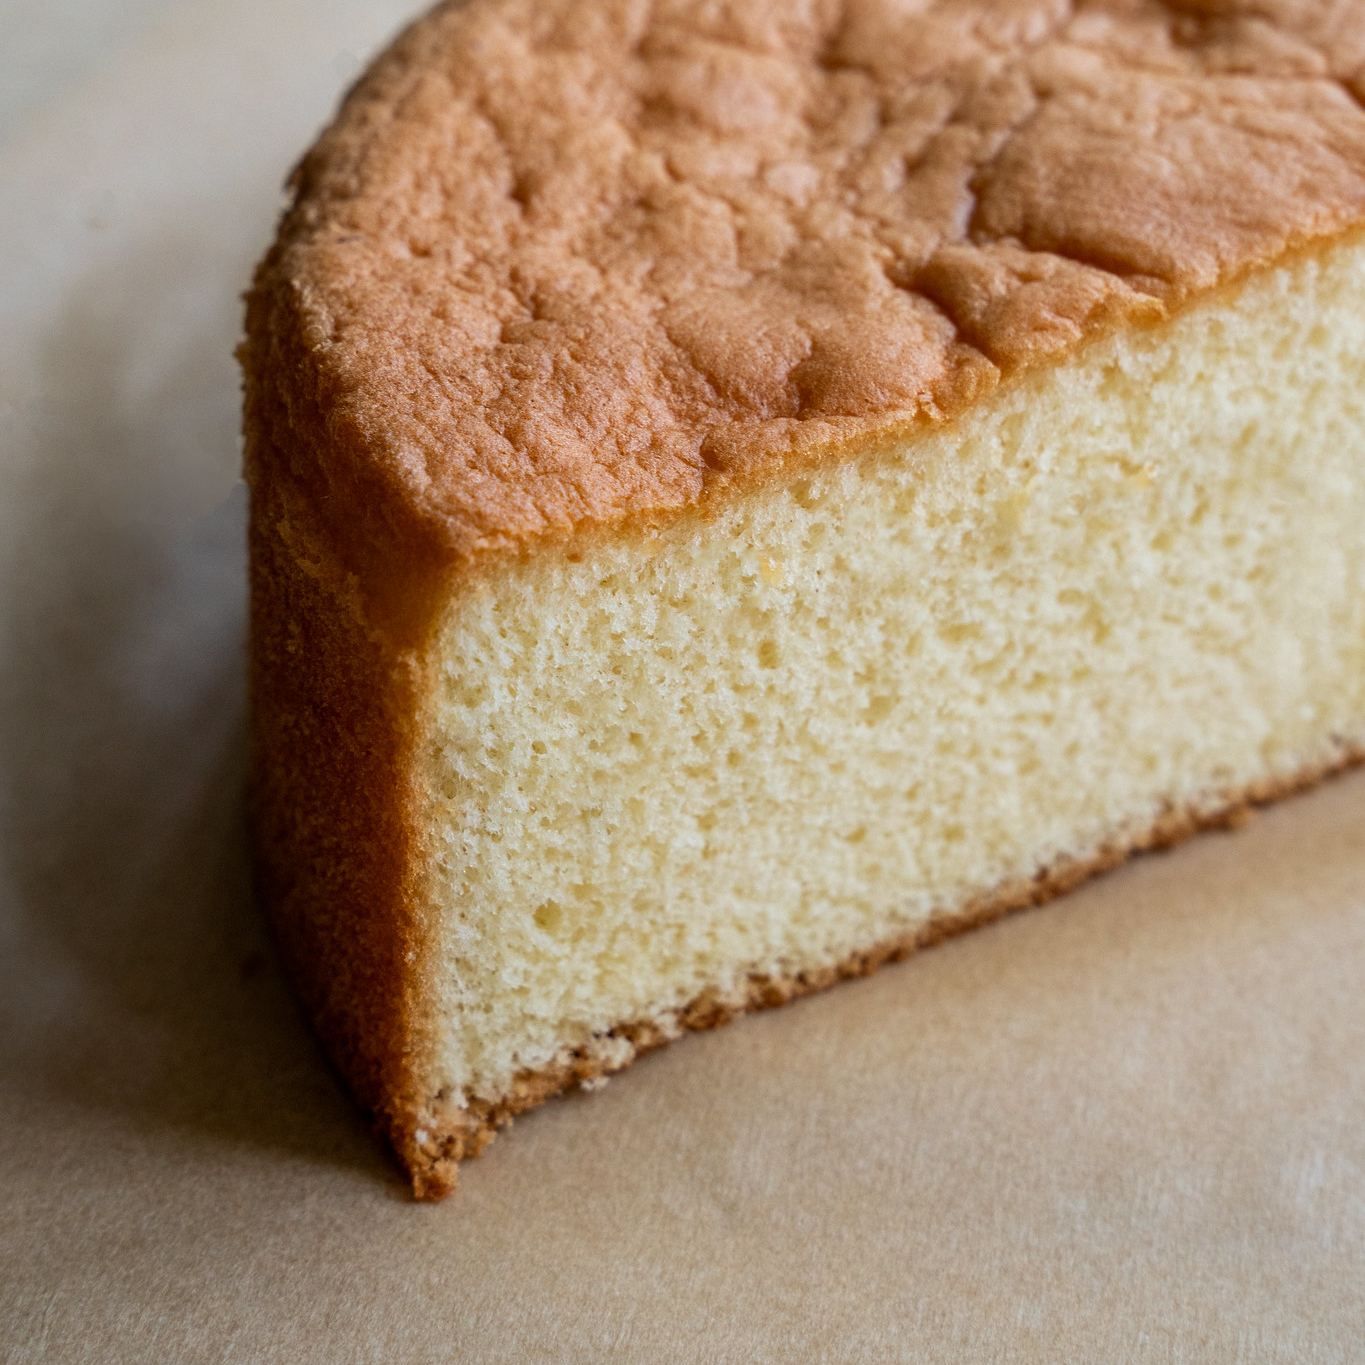 HOW TO MAKE A PERFECT GENOISE SPONGE CAKE